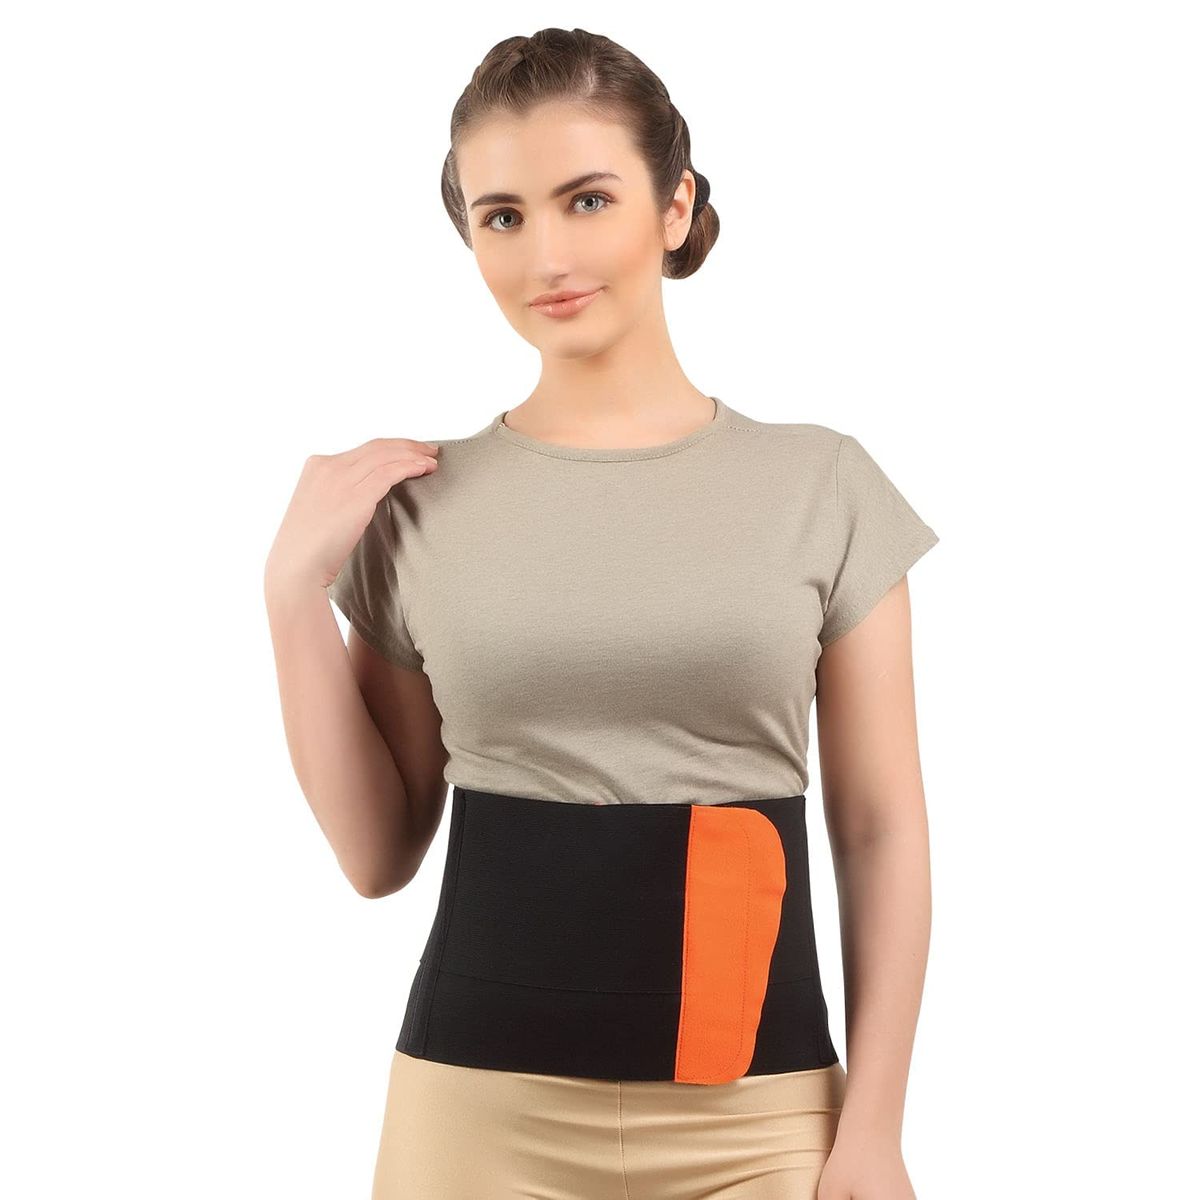 Flamingo Abdominal Belt After Delivery for Tummy Reduction,Belly